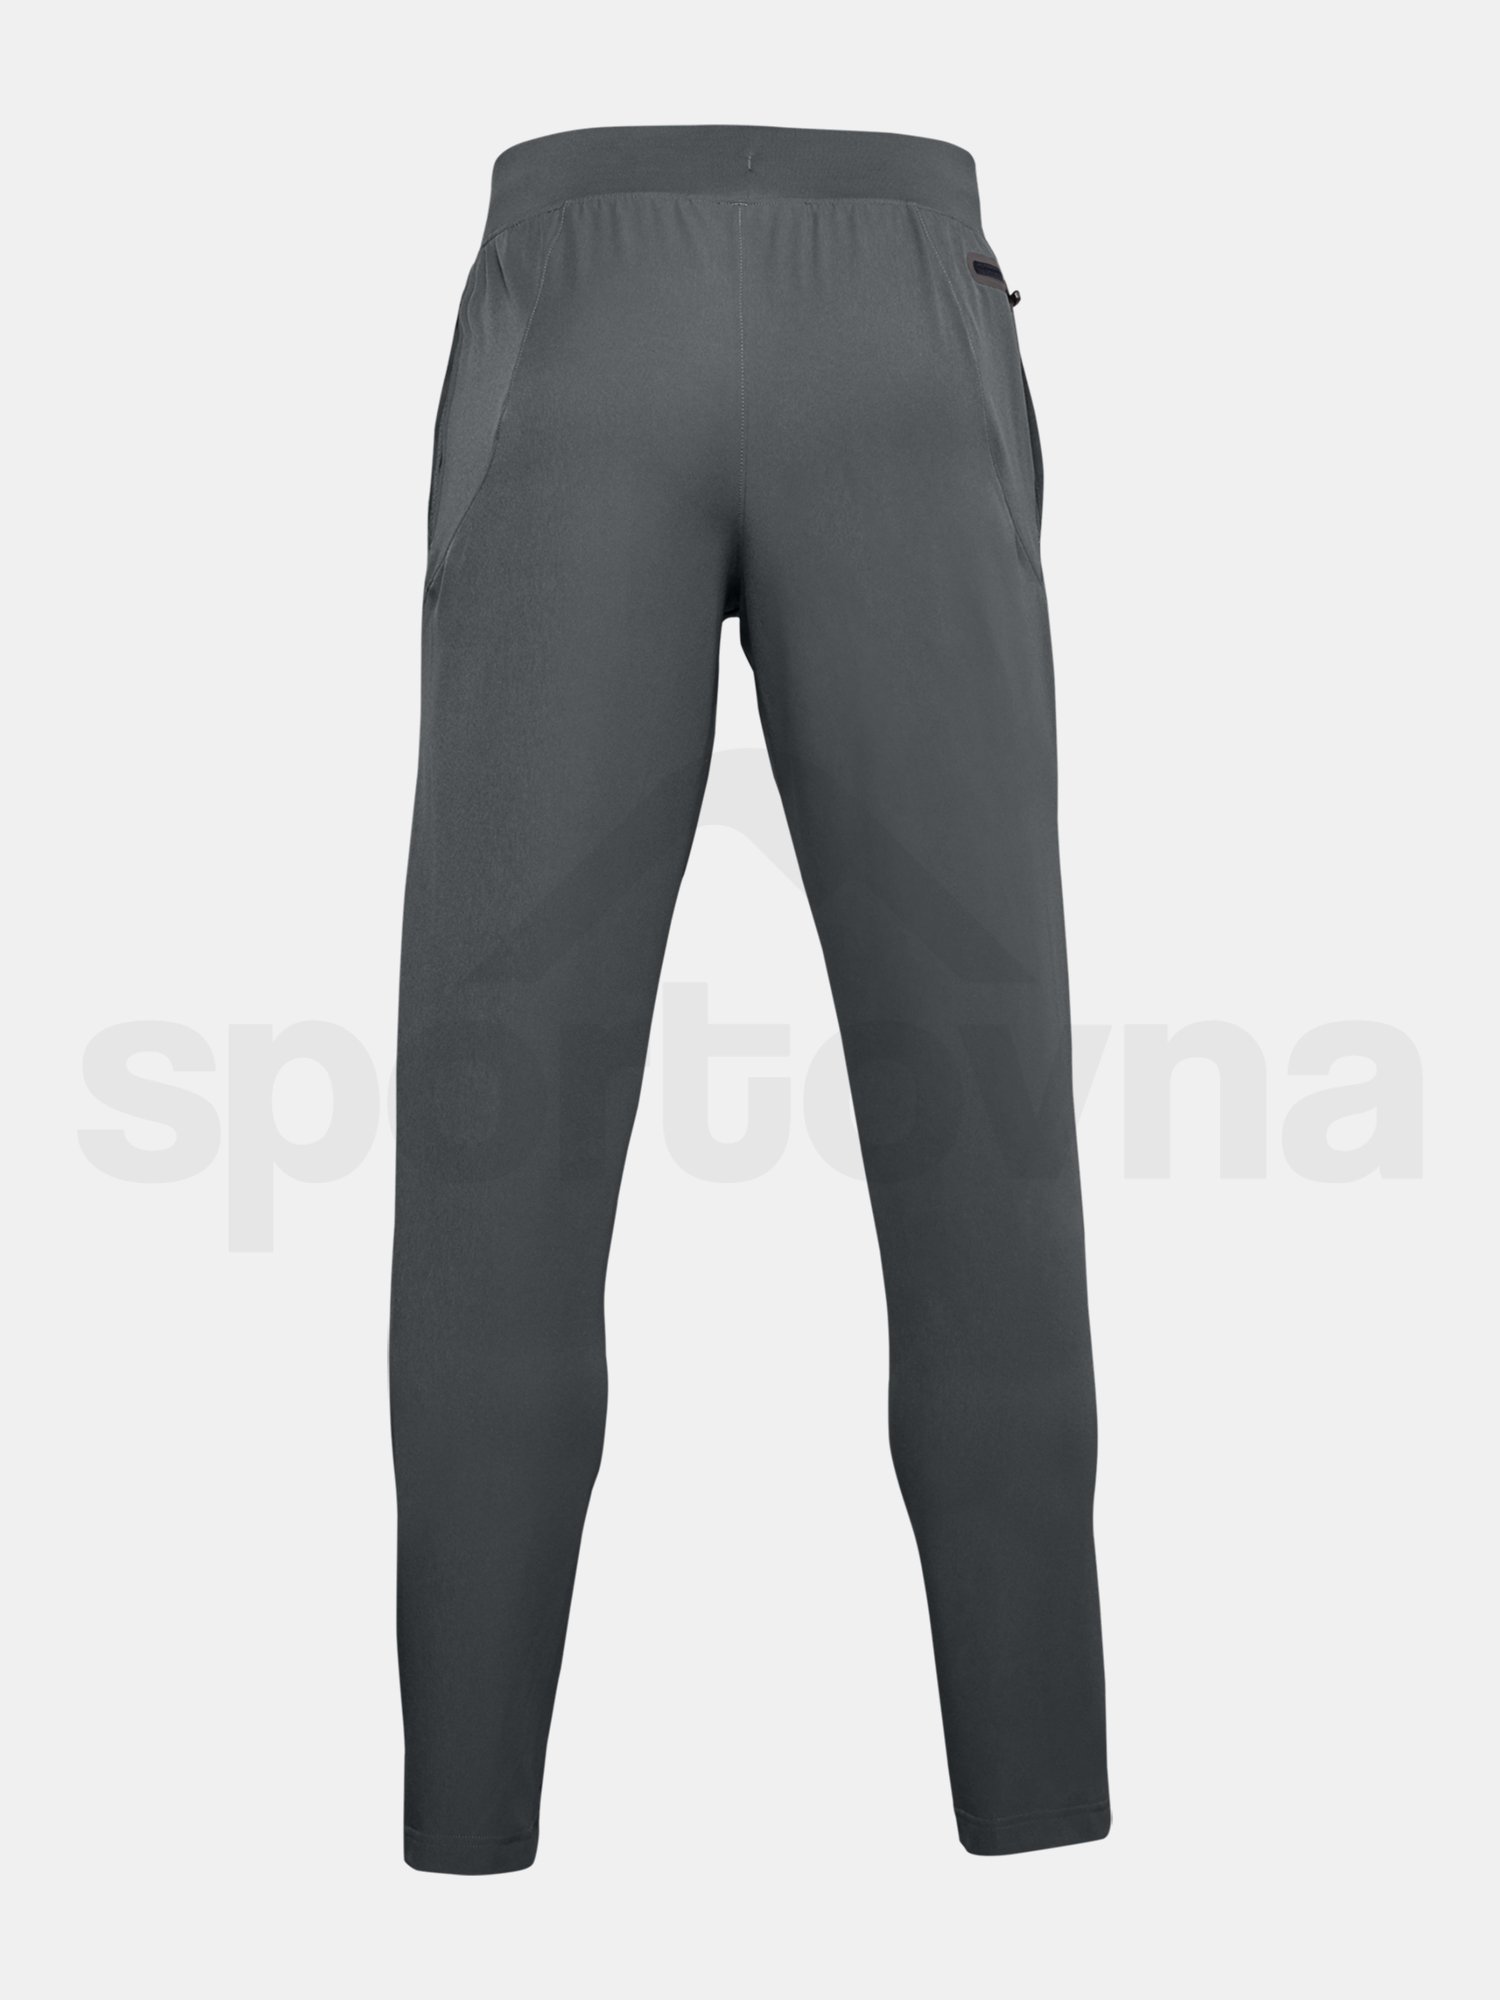 Kalhoty Under Armour UNSTOPPABLE TAPERED Storm PANTS-GRY